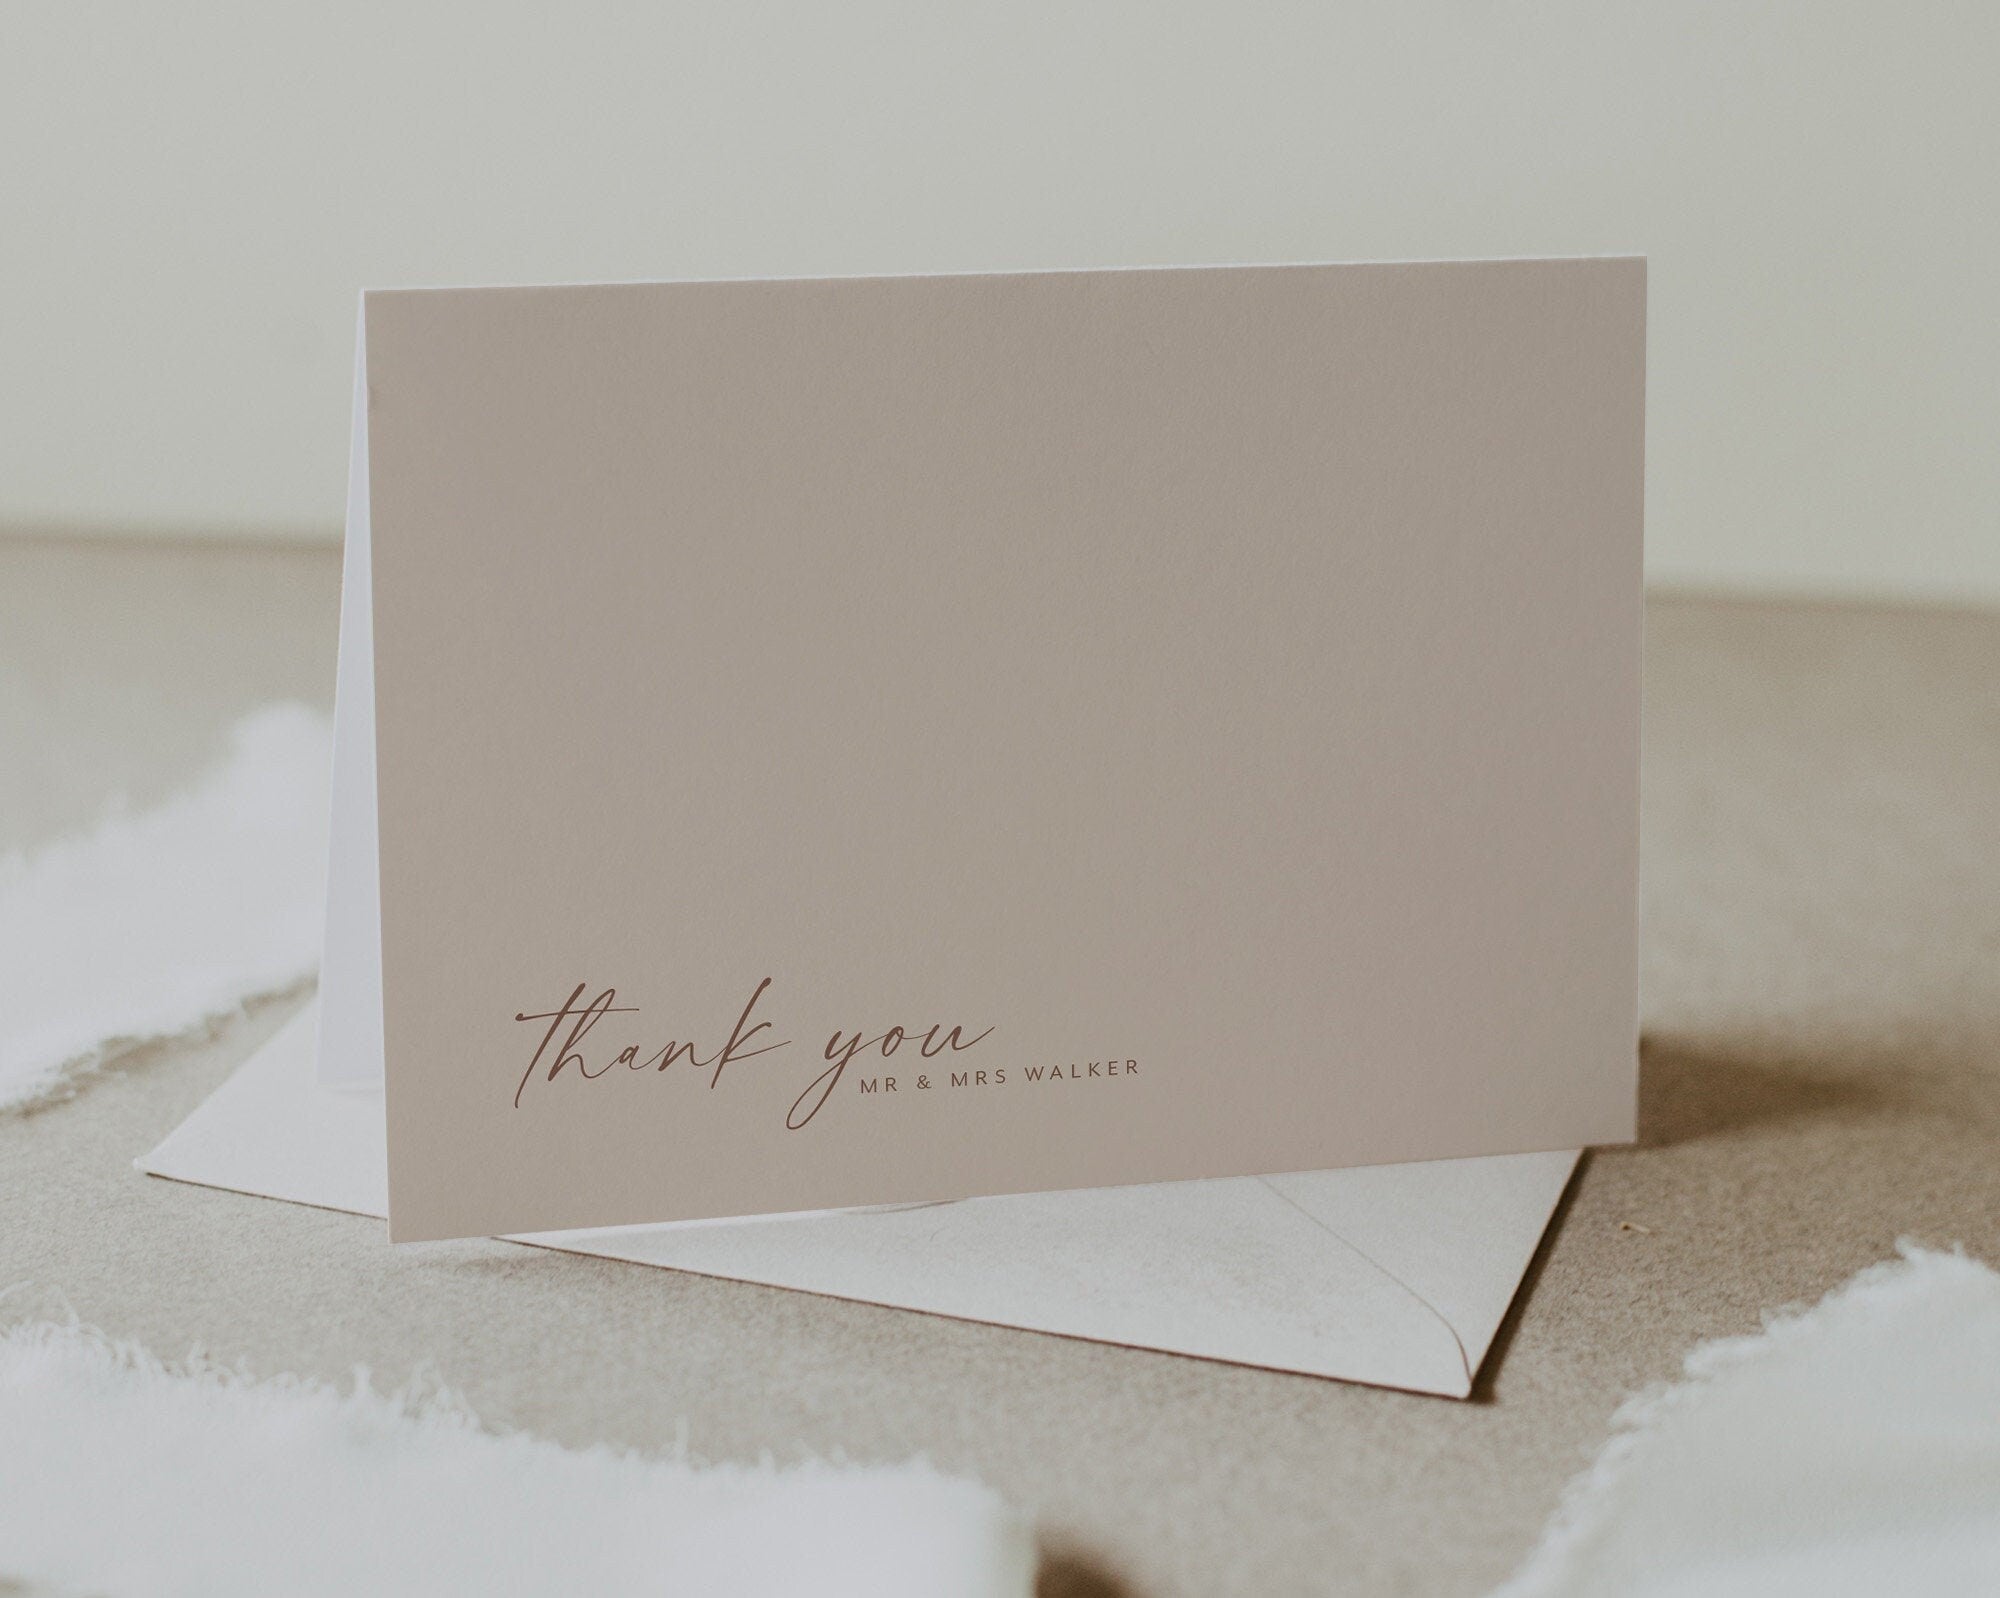 Thank You Card Template, Printable Thank You Card, Instant Download Thank You Cards, Minimalist Thank You Card, Modern Wedding, Annalyse